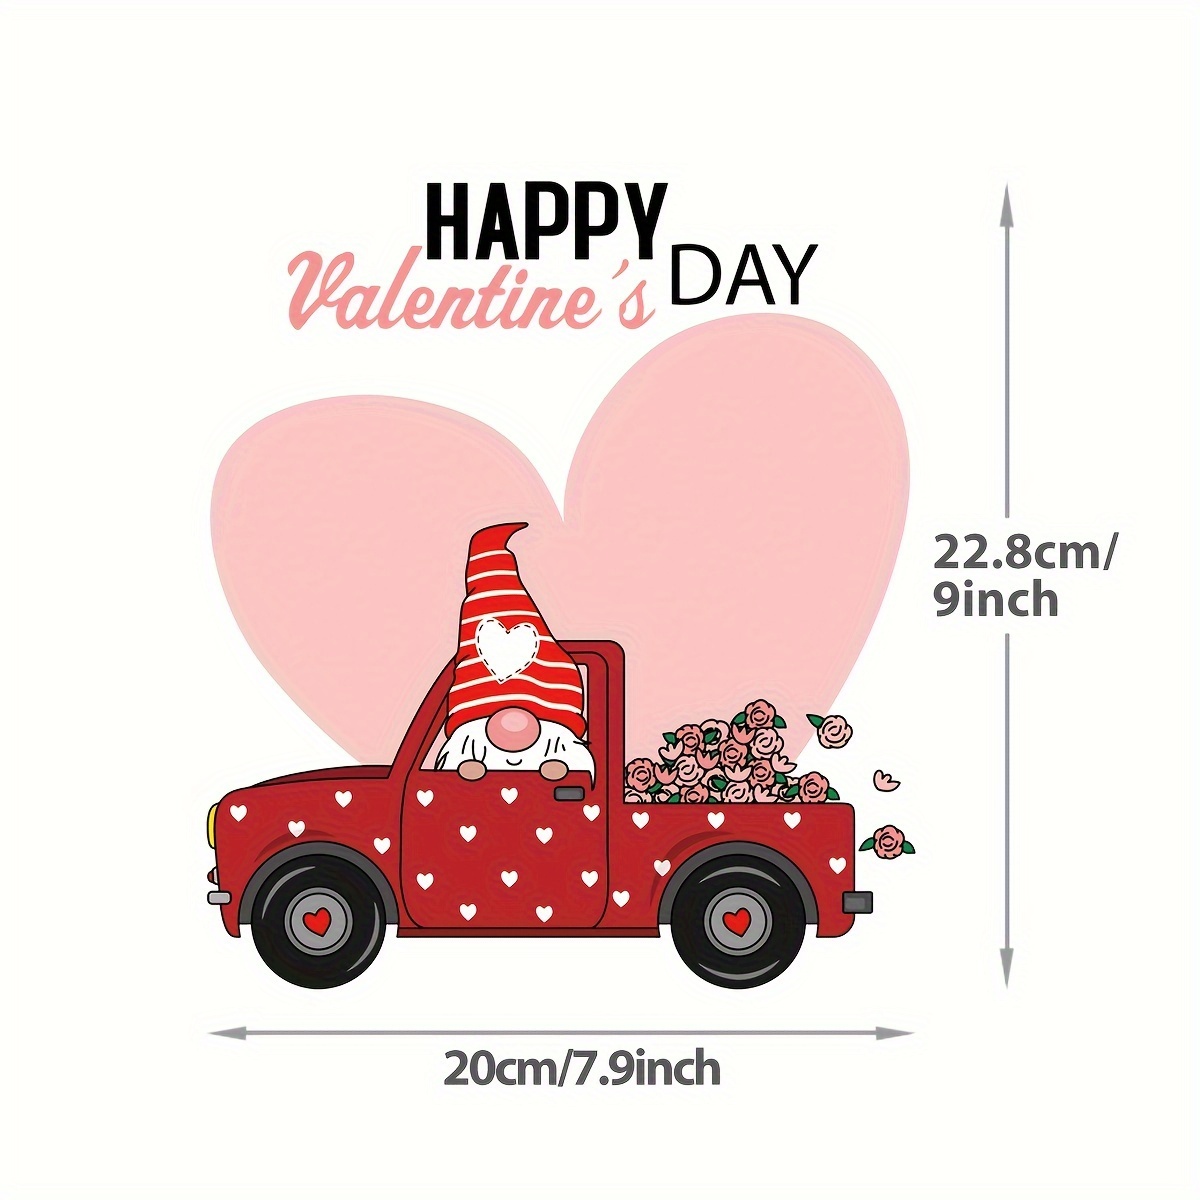 Valentine's Day Among Us Heat Iron on Transfer Decal